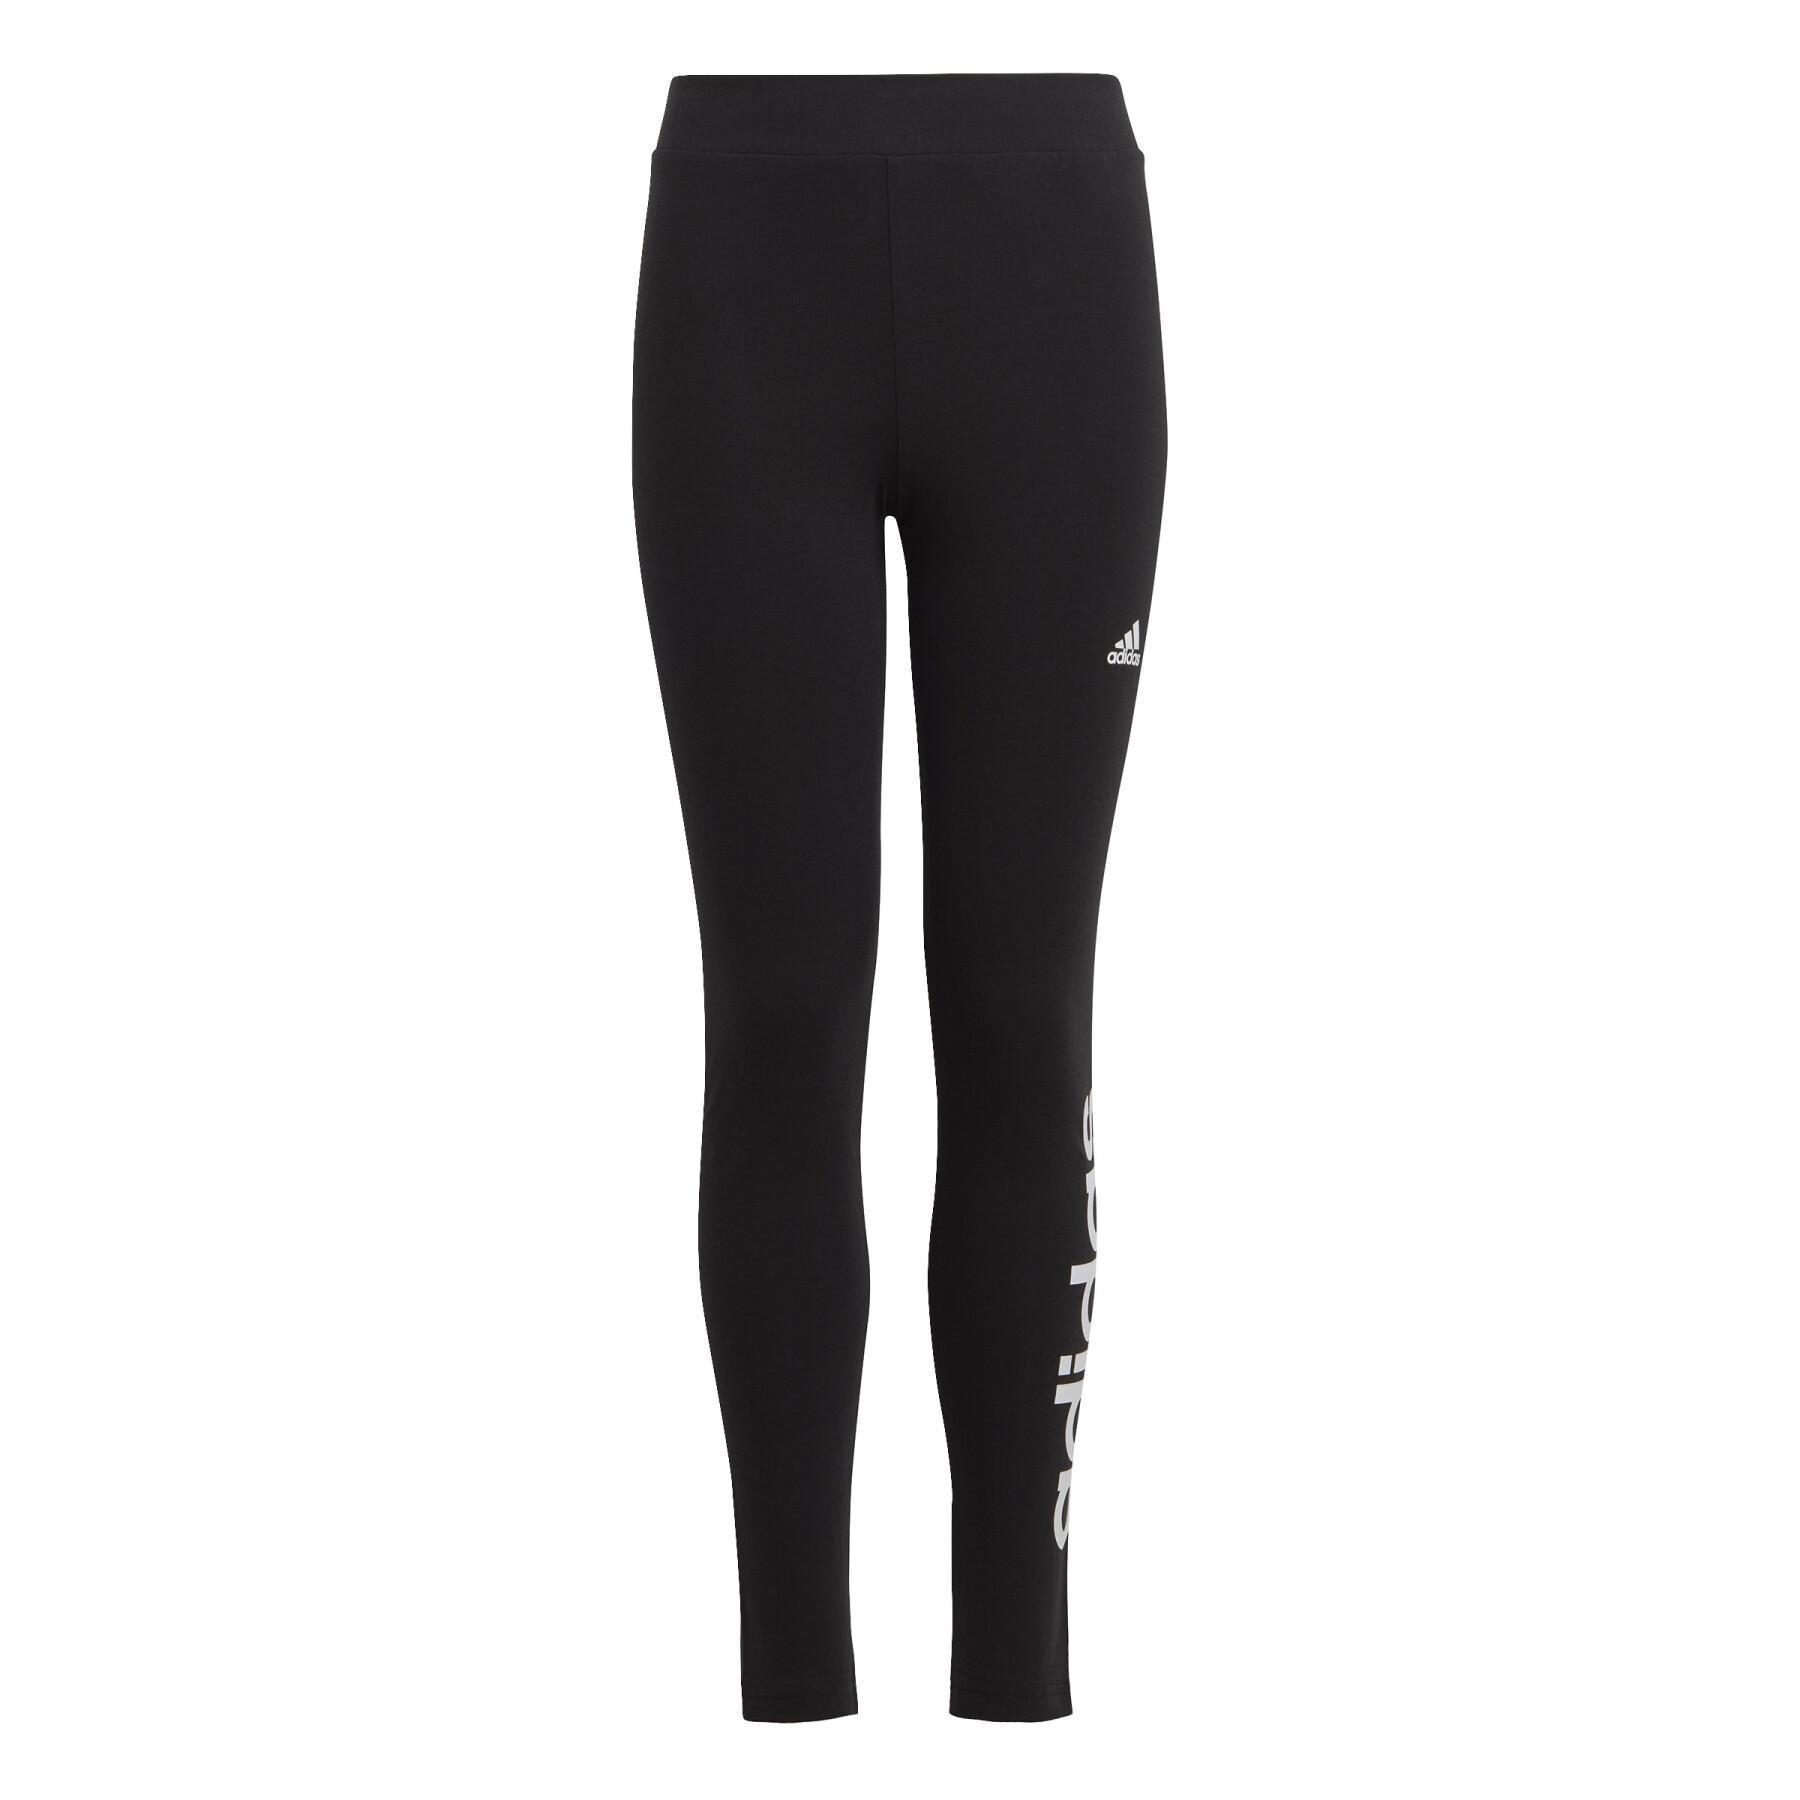 adidas leggings cotton - OFF-63% >Free Delivery